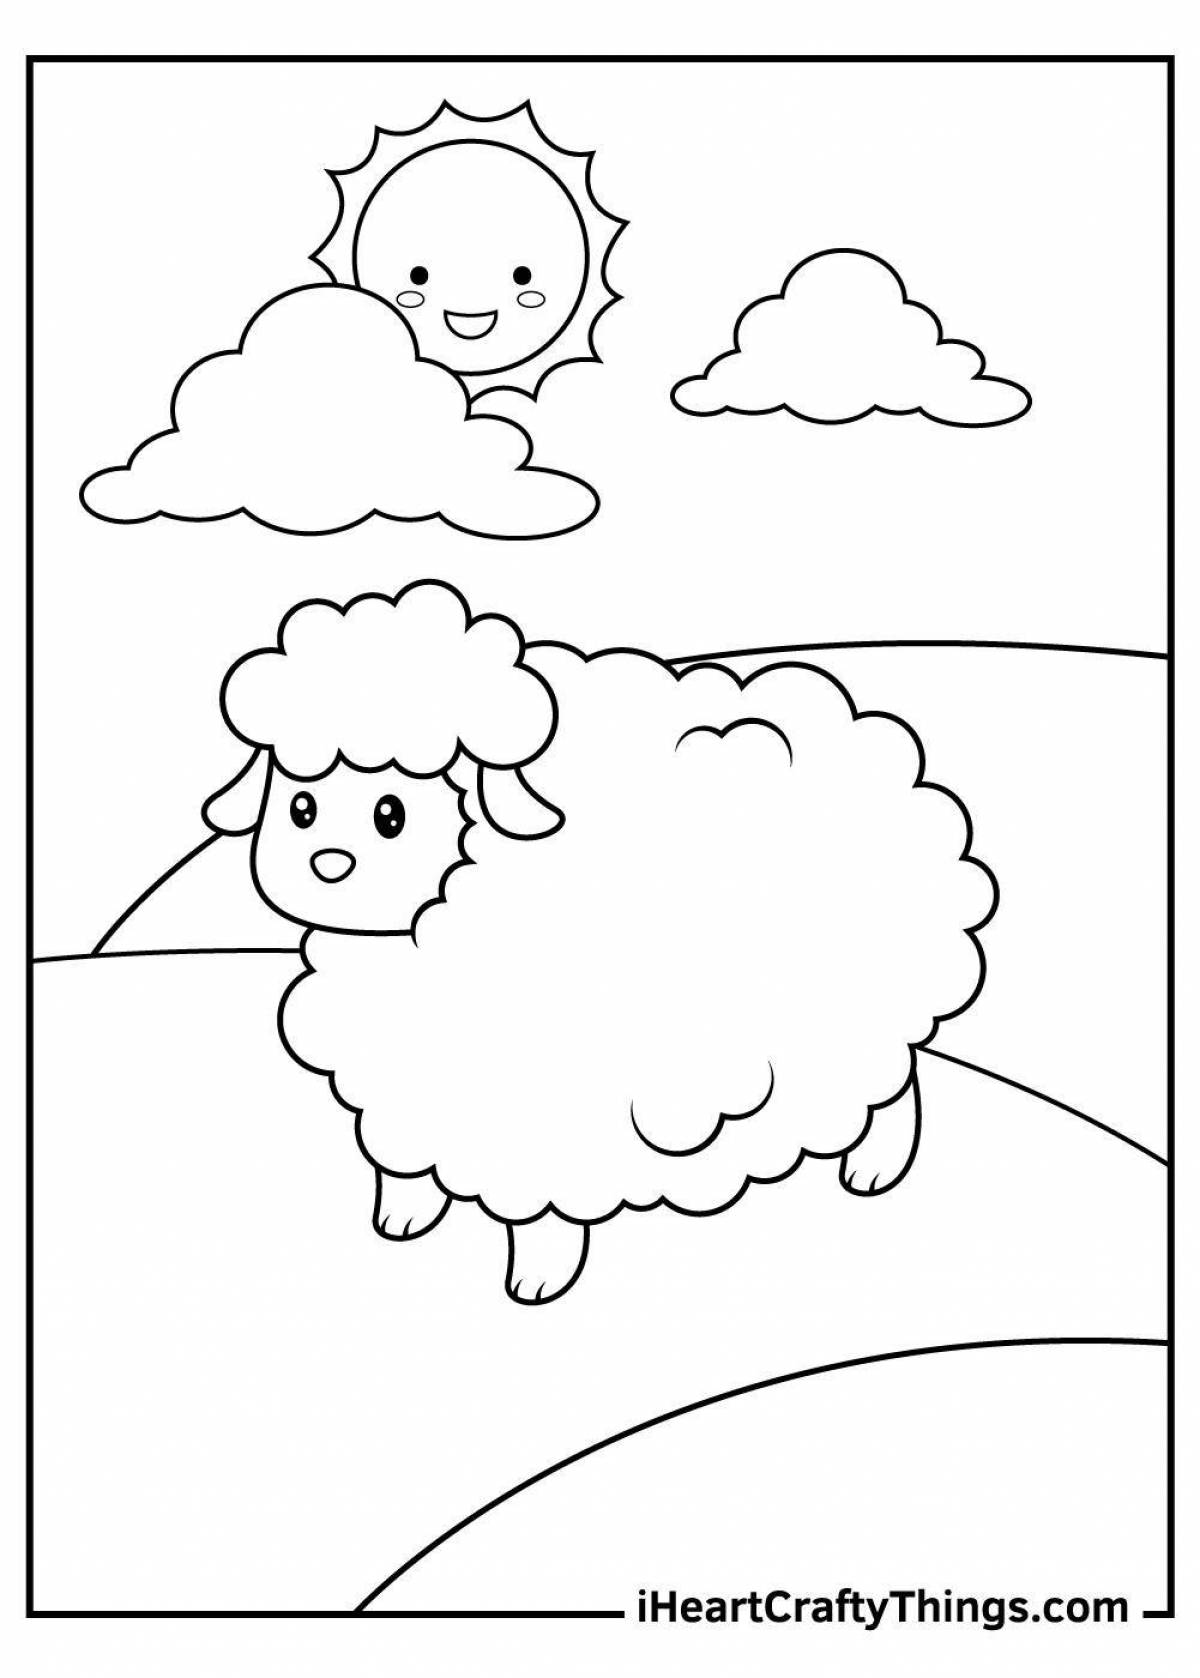 Shiny sheep coloring book for 2-3 year olds